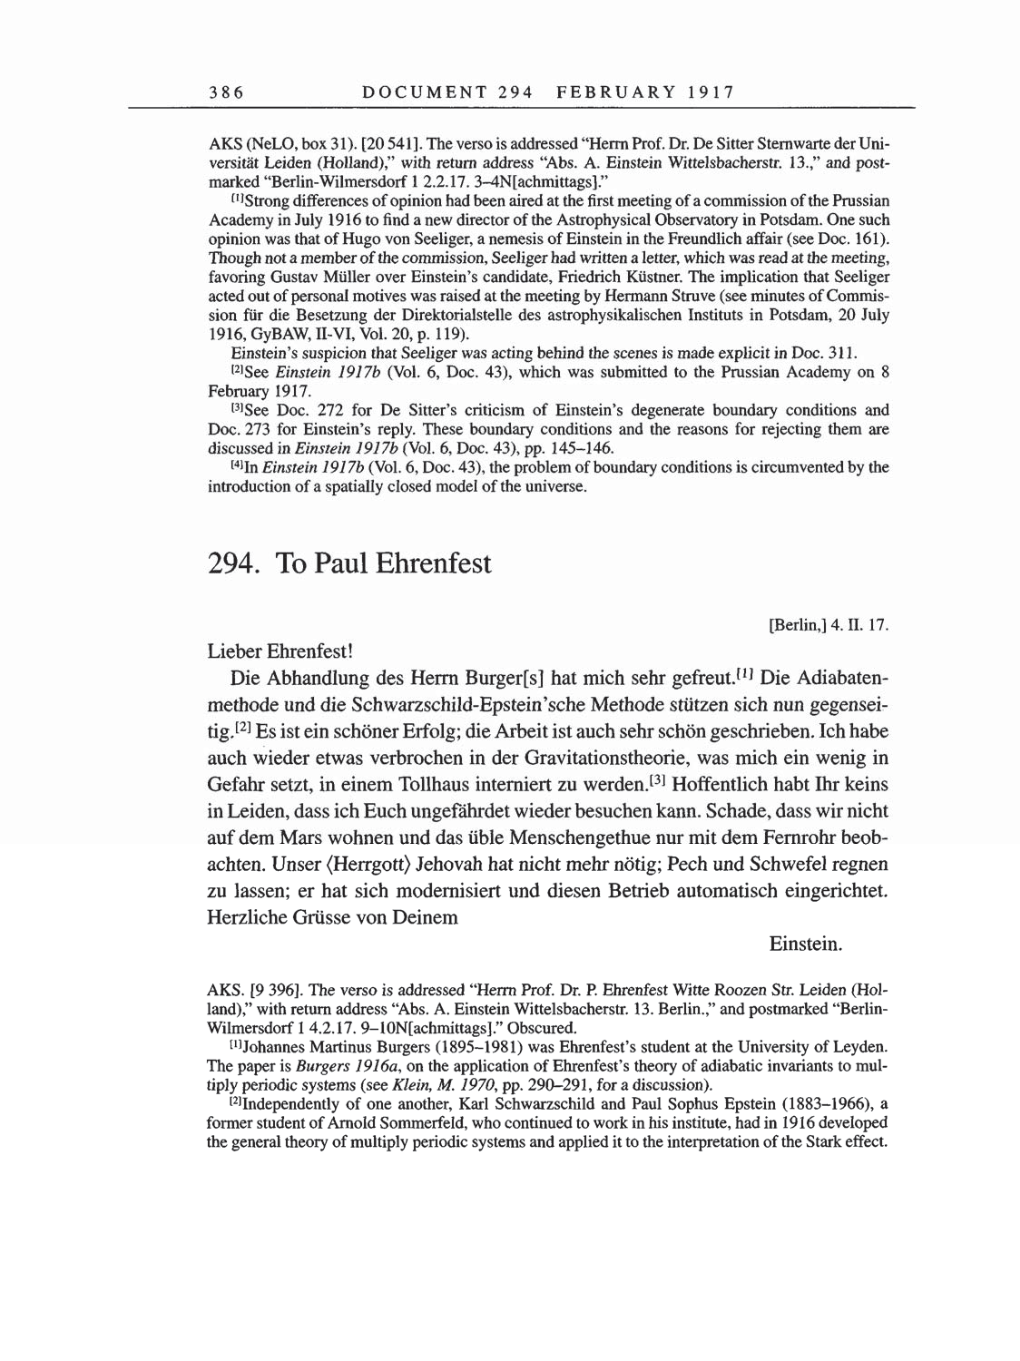 Volume 8, Part A: The Berlin Years: Correspondence 1914-1917 page 386